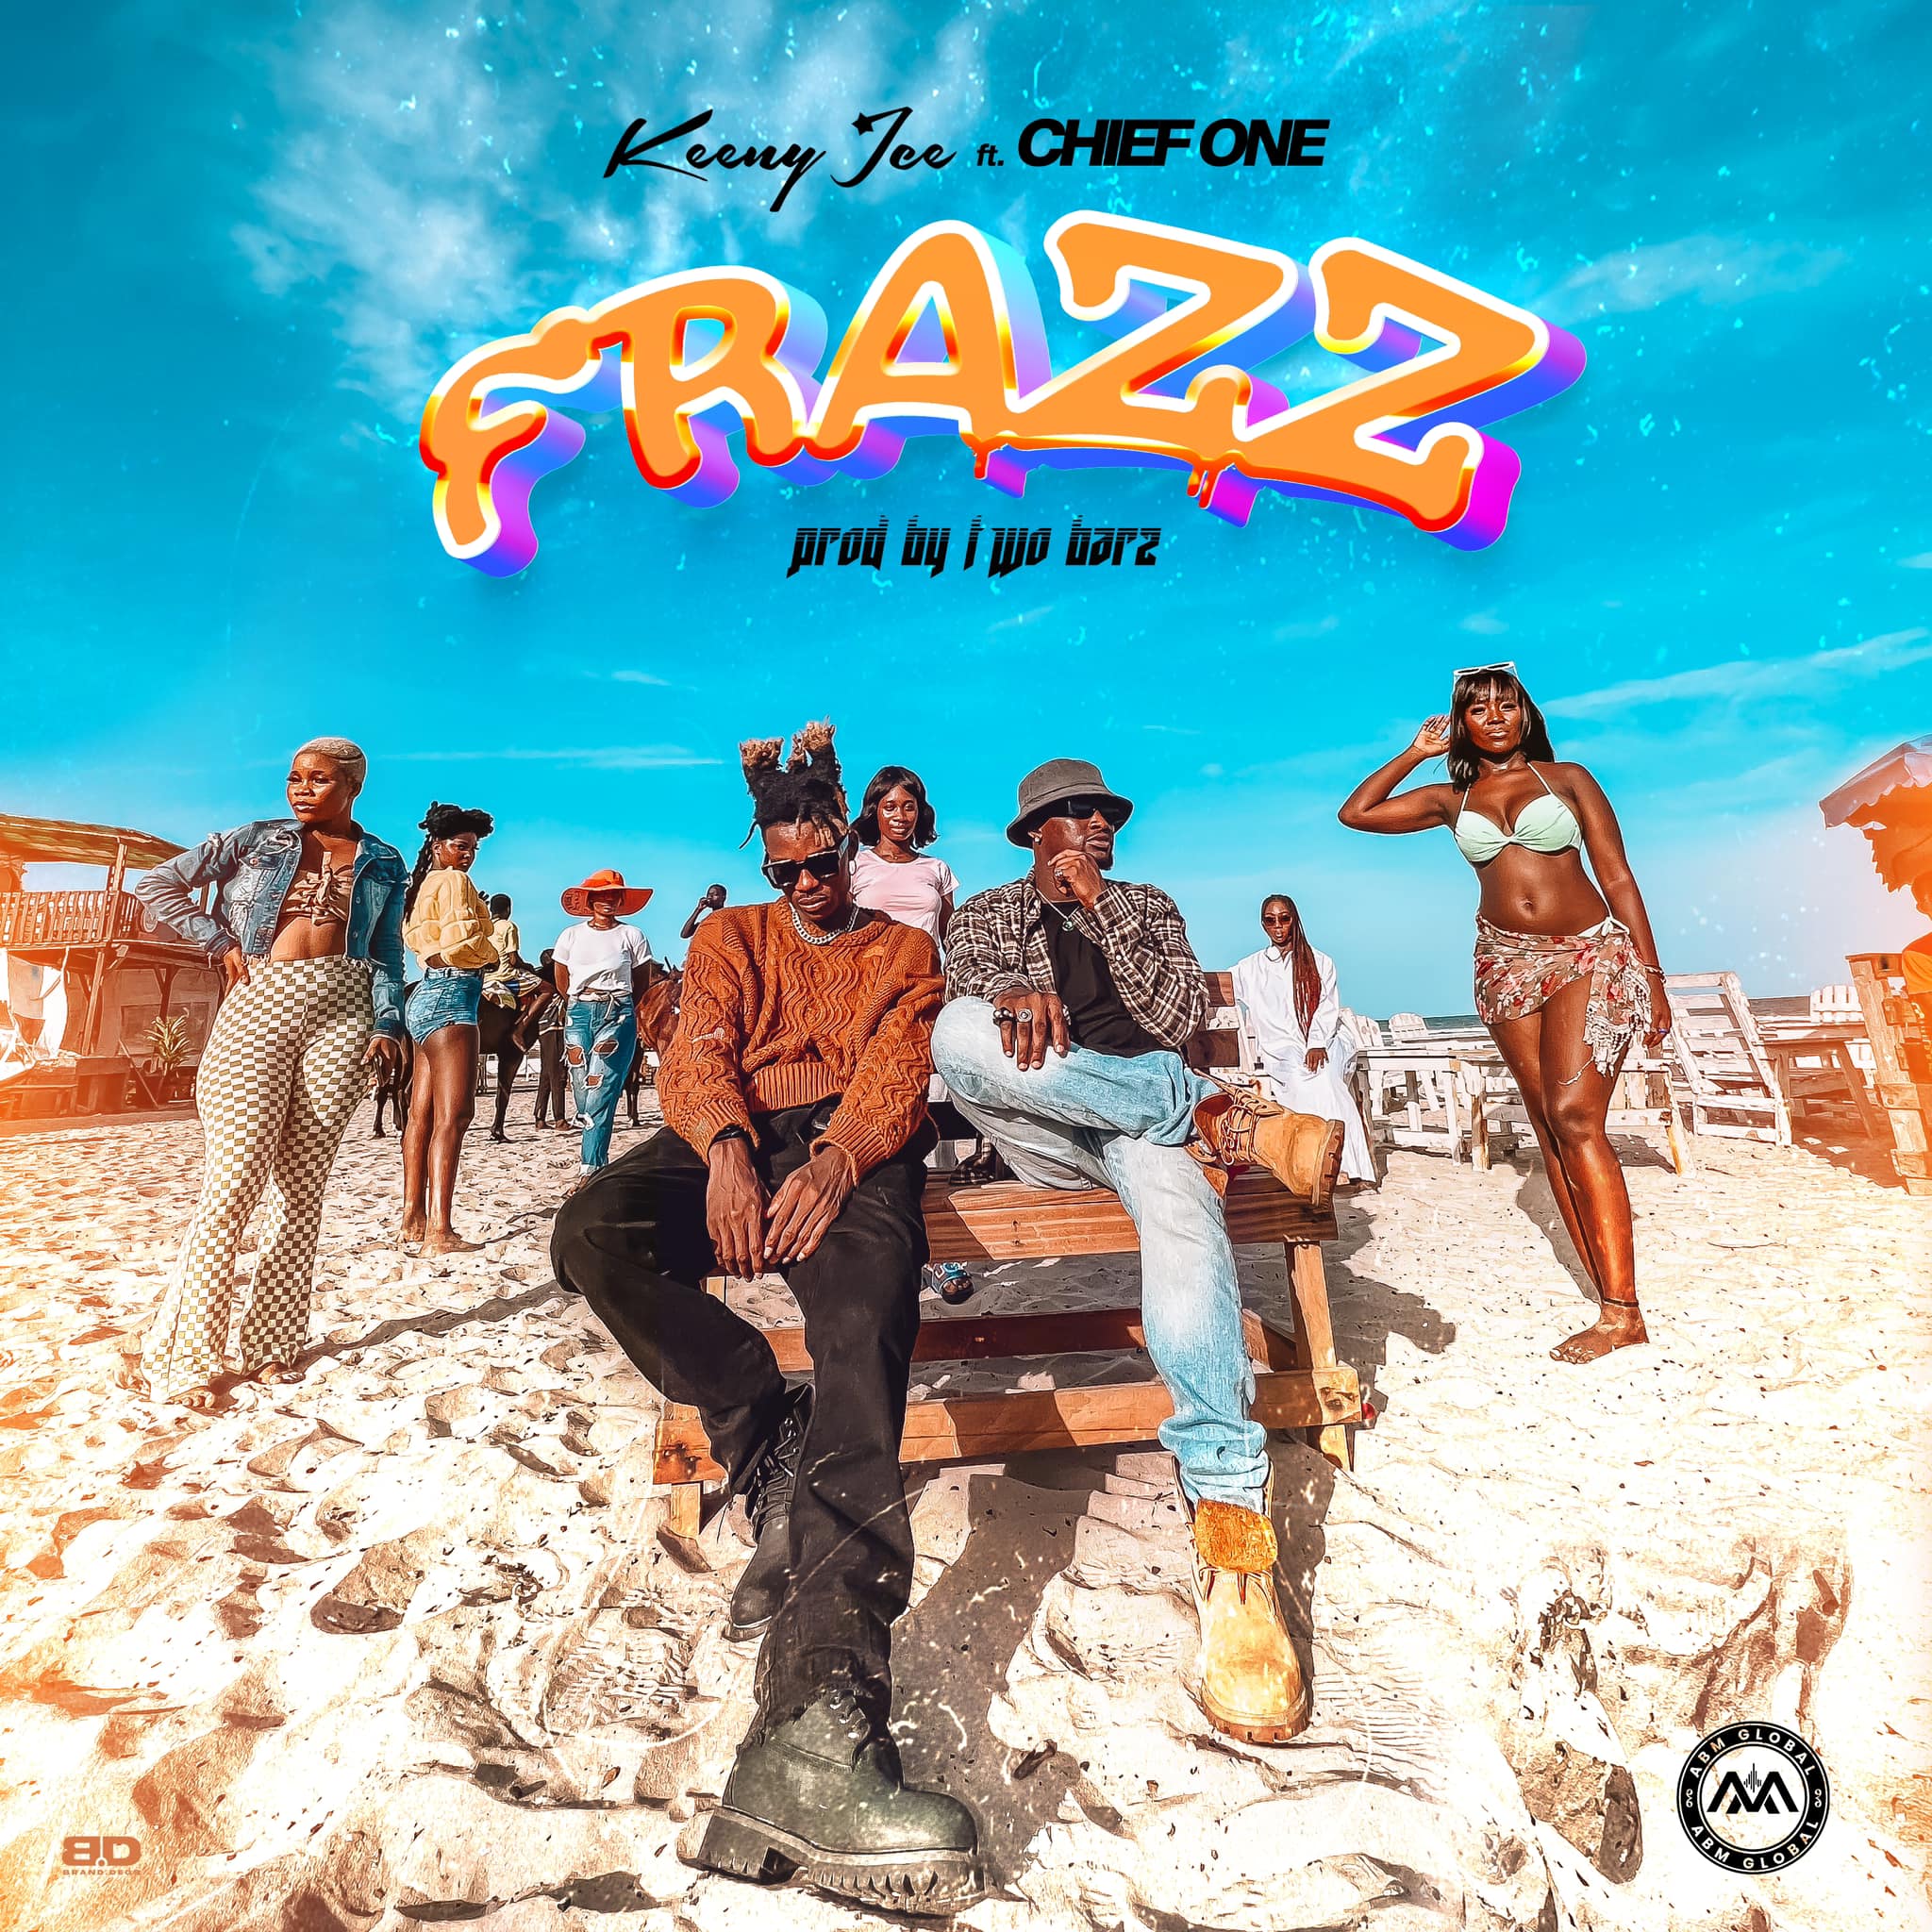  "Frazz" by Keeny Ice x Chief One (Prod By Two Barz) mp3 DOWNLOAD 